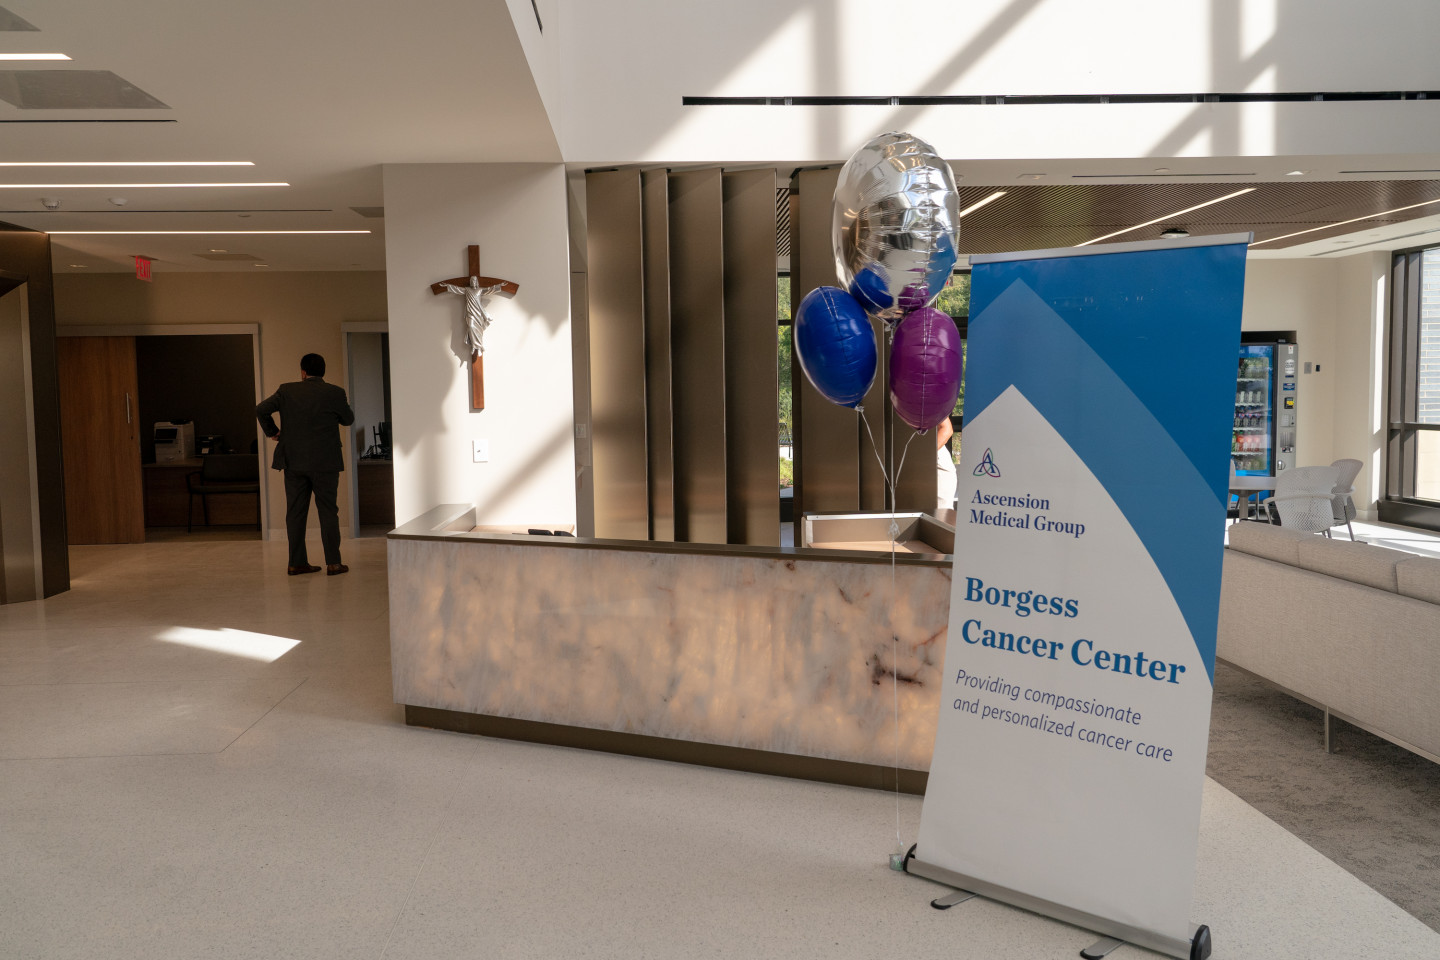 The lobby of the Ascension Borgess Cancer Center.